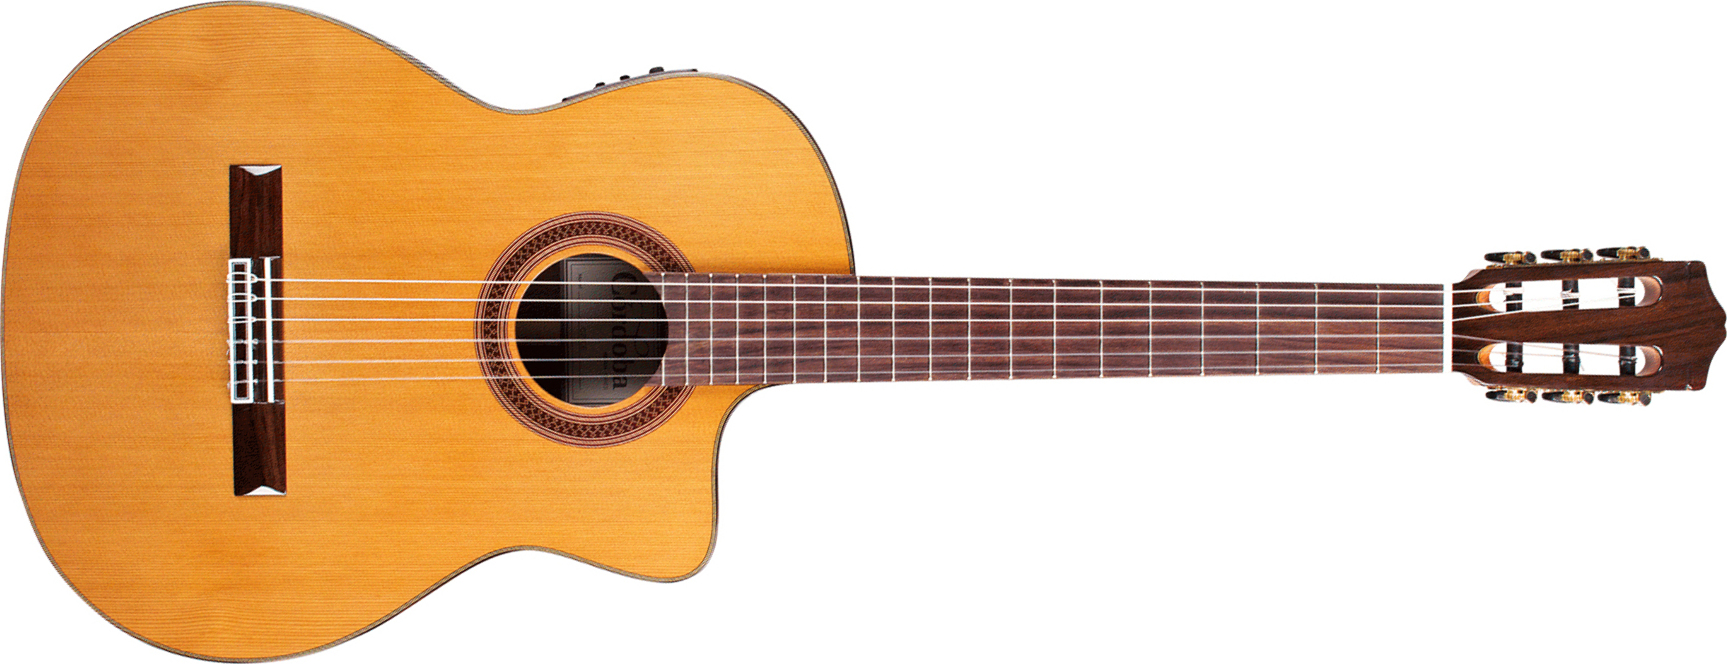 Cordoba C7 Cd-ce Traditional 4/4 Cedre Palissandre Rw - Natural - Classical guitar 4/4 size - Main picture